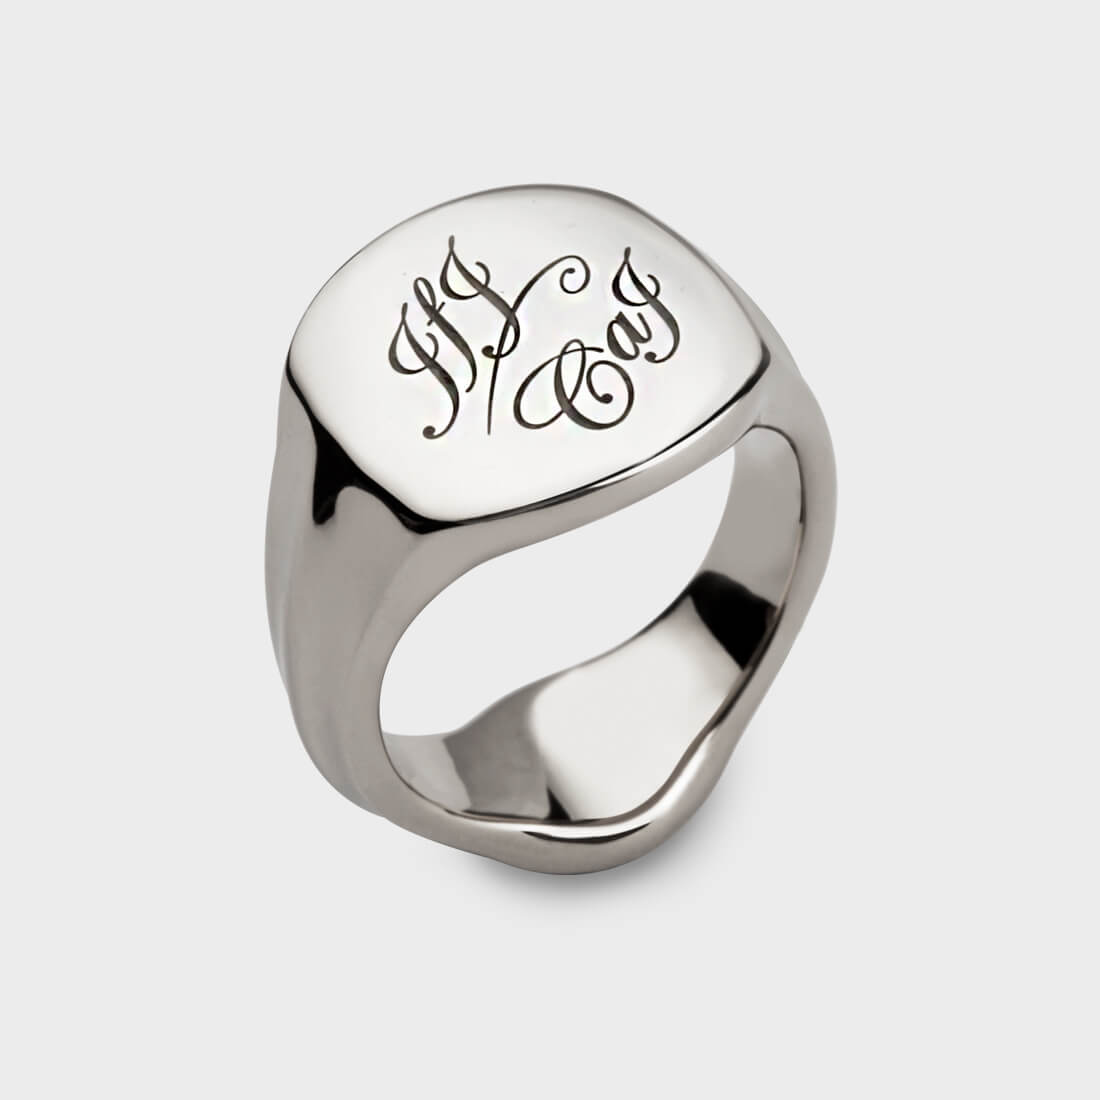 A sterling silver signet ring with interlocking letters on it